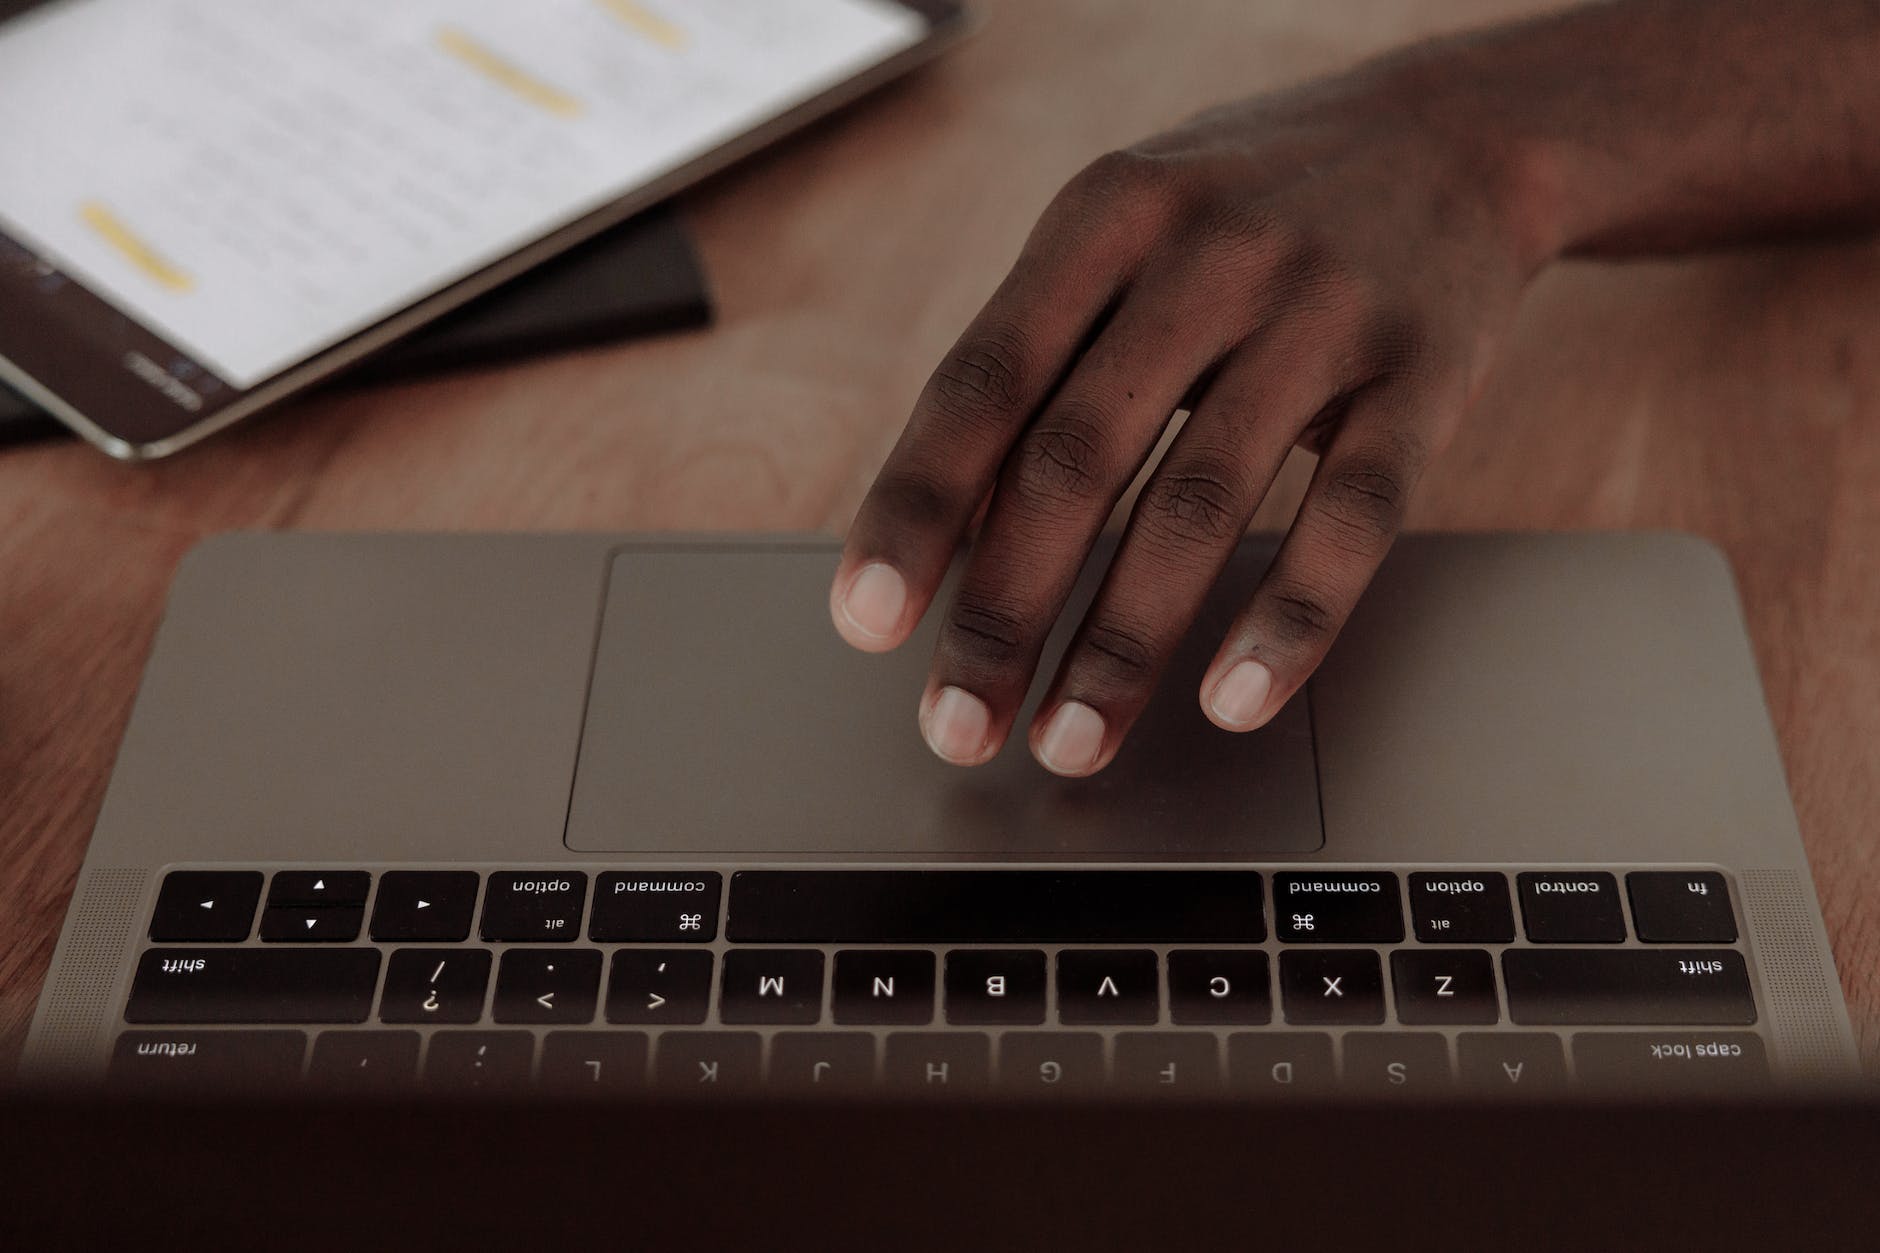 Photo by Thirdman on <a href="https://www.pexels.com/photo/person-s-hand-on-silver-laptop-computer-5592598/" rel="nofollow">Pexels.com</a>